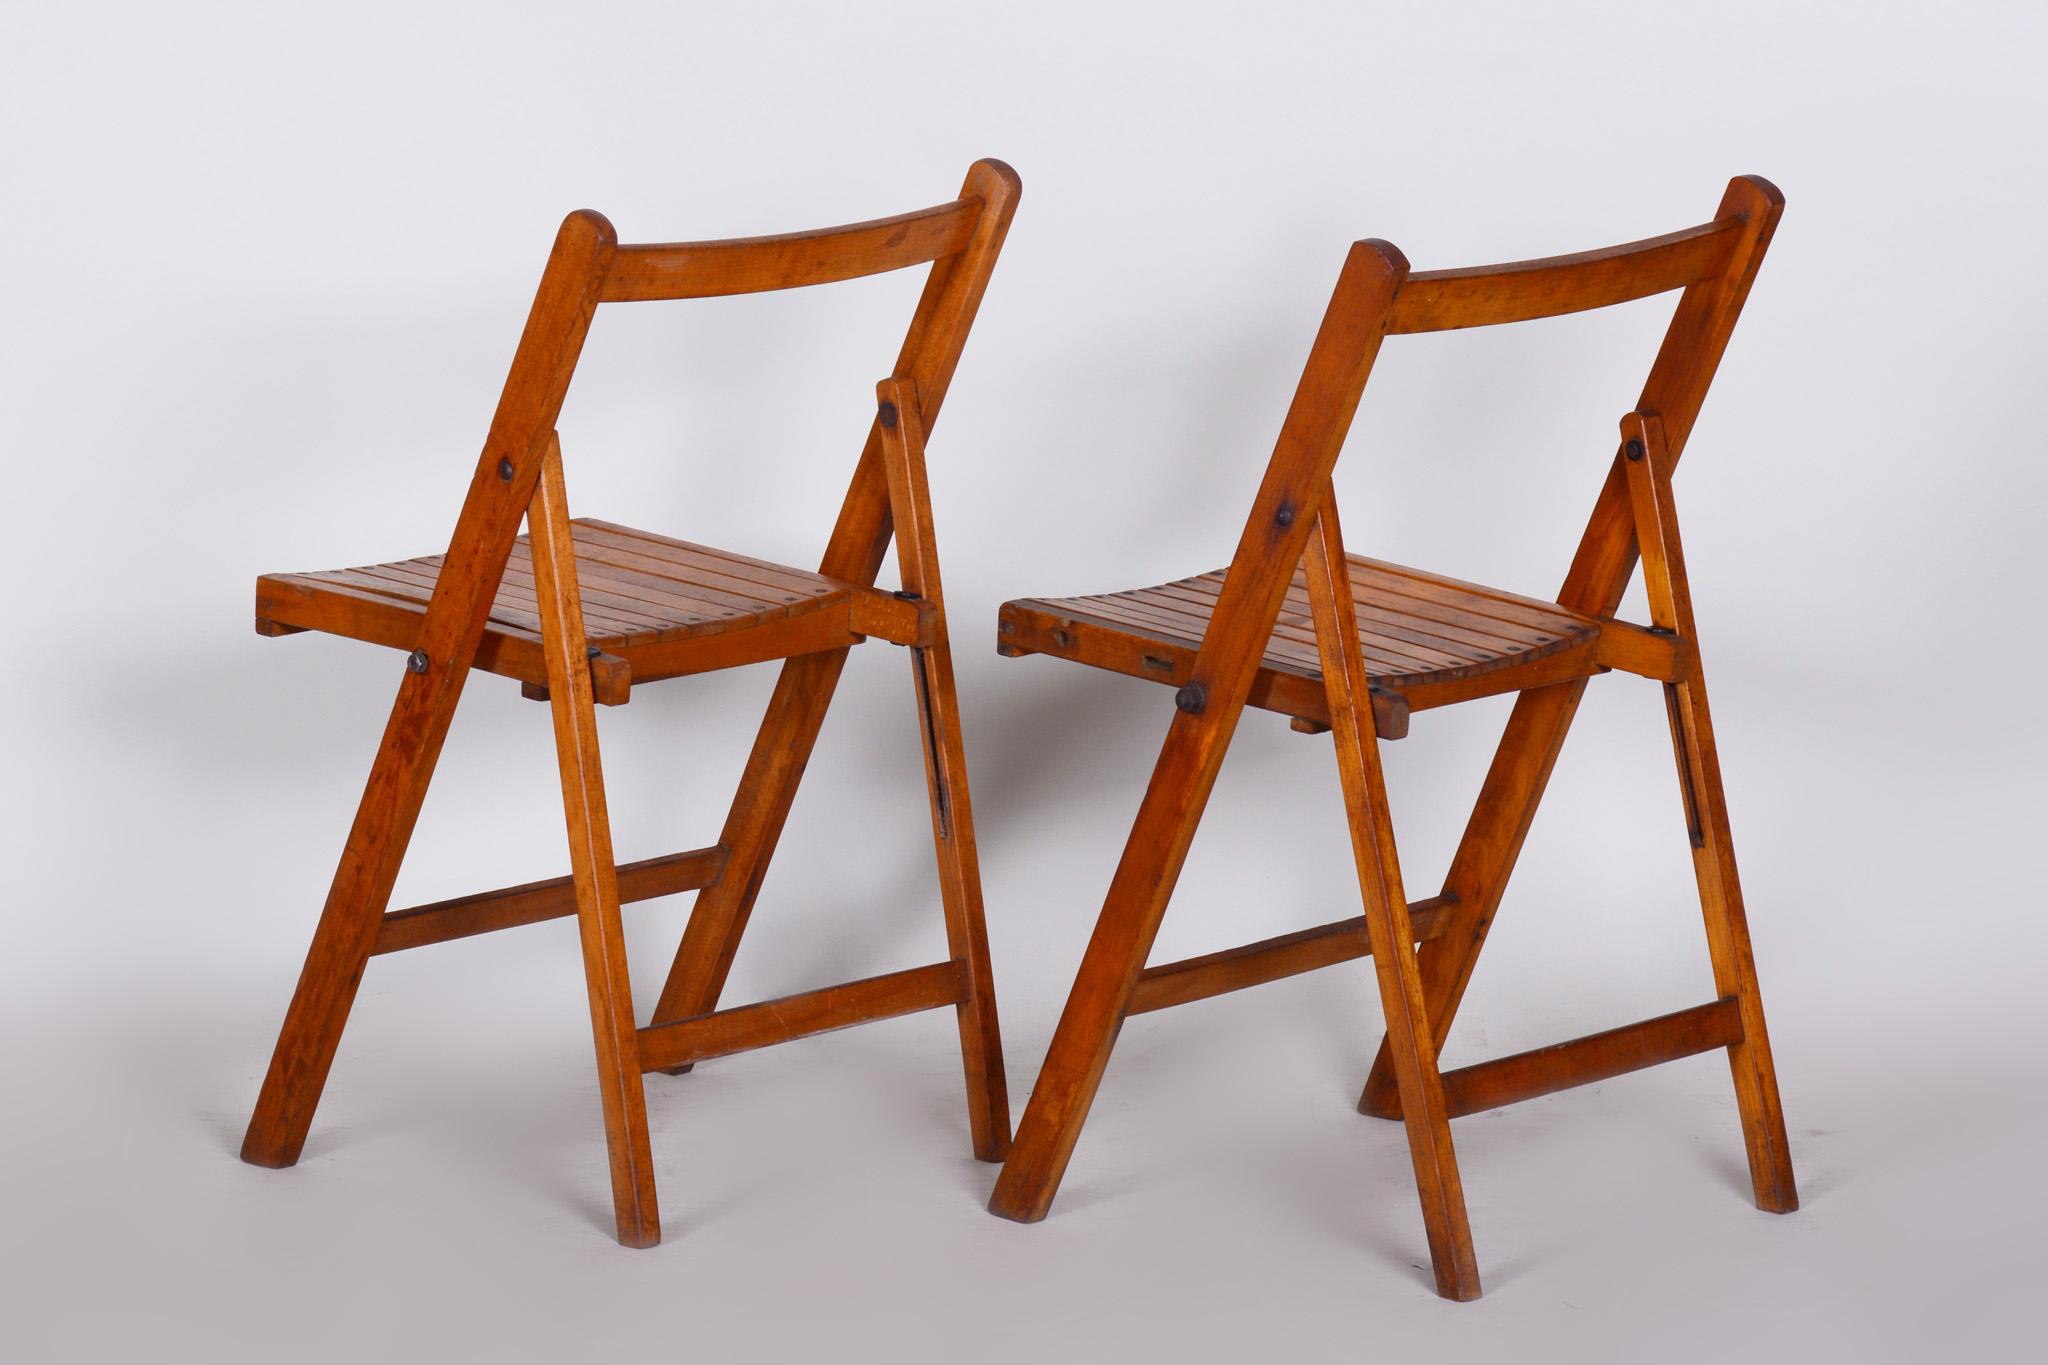 Czech Beech Midcentury Chairs, 3 Pieces, 1950s, Well Preserved Condition For Sale